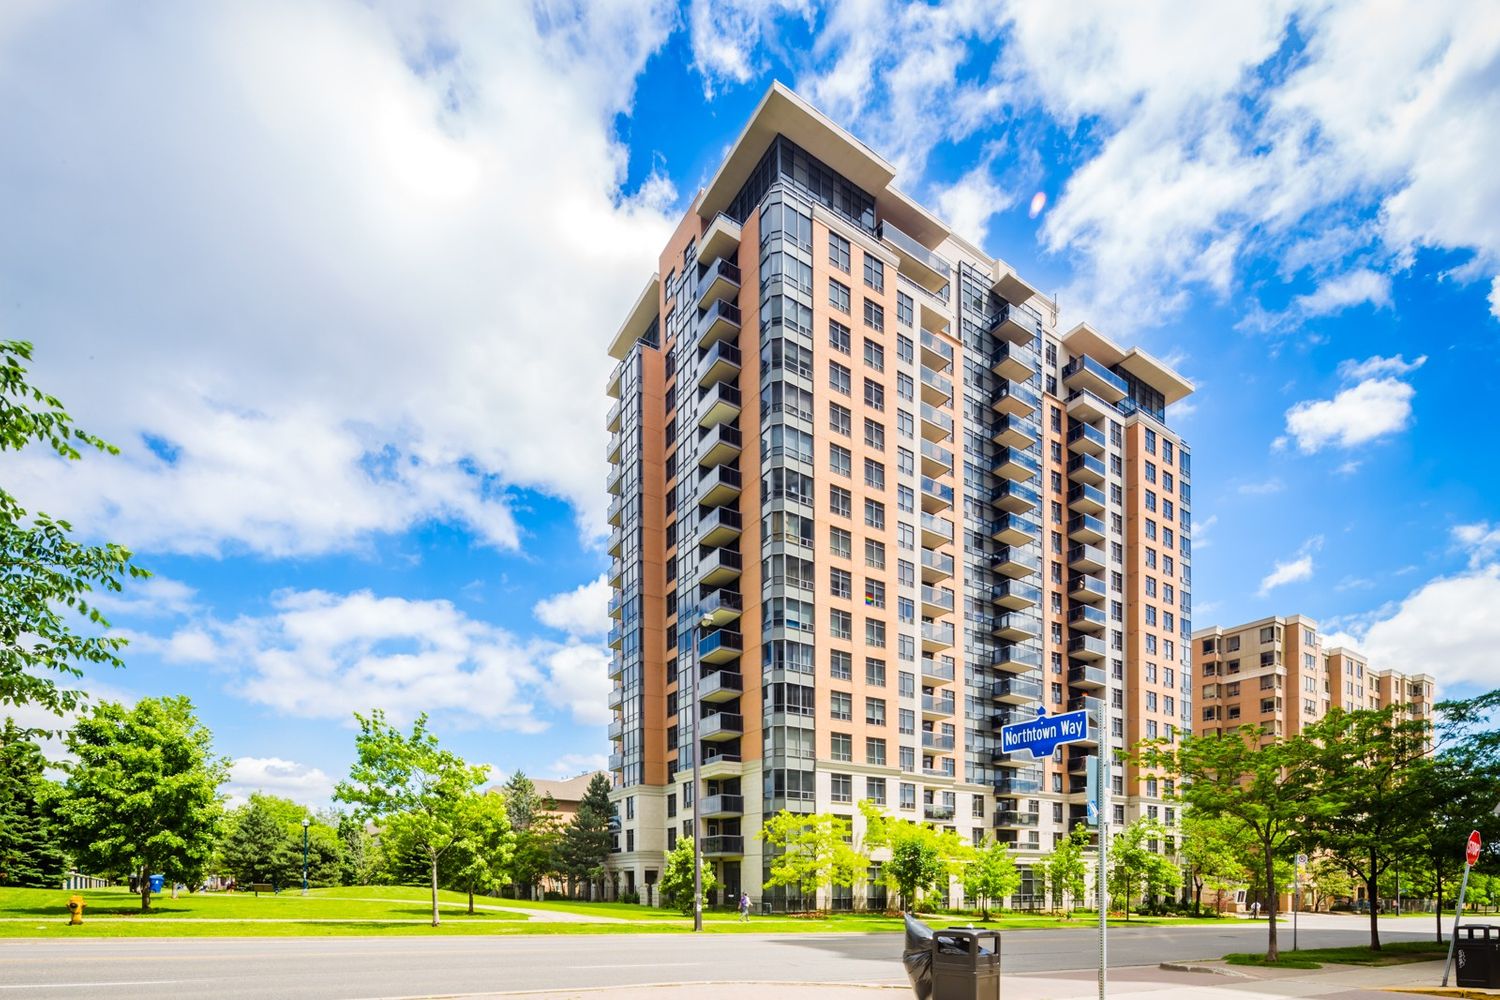 880 Grandview Way. Parkside at Northtown III Condos is located in  North York, Toronto - image #1 of 3